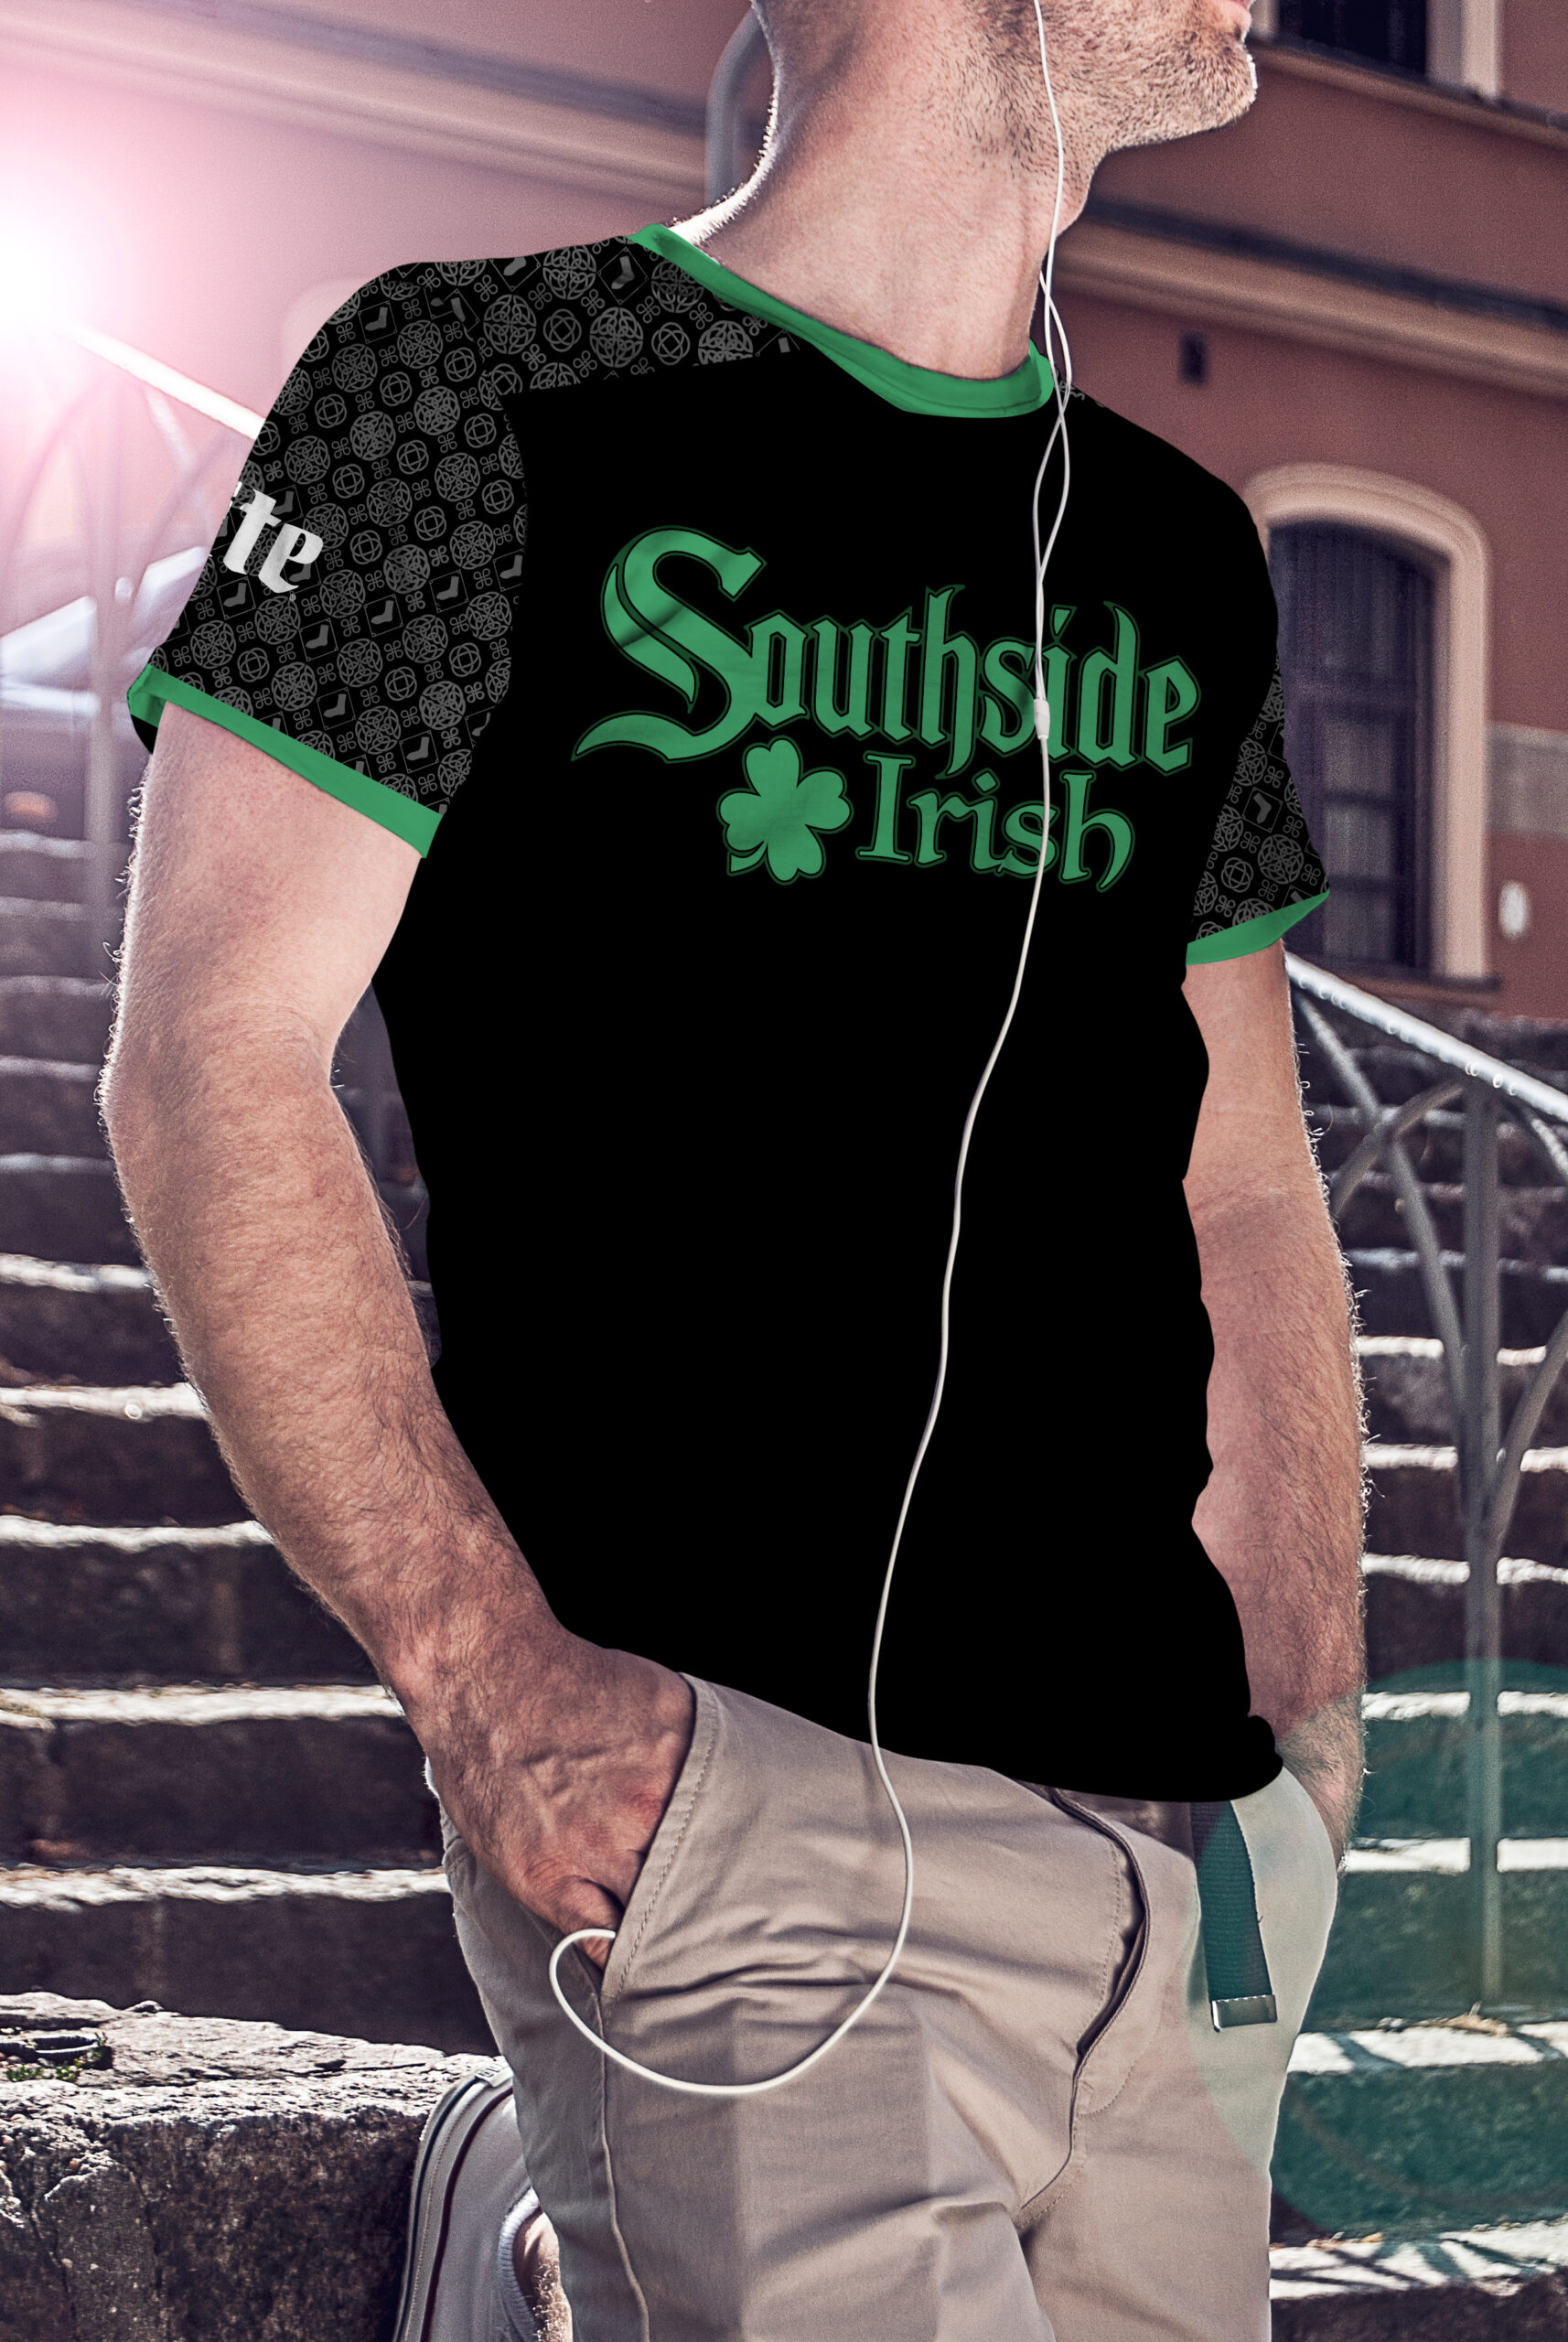 white sox new jersey southside